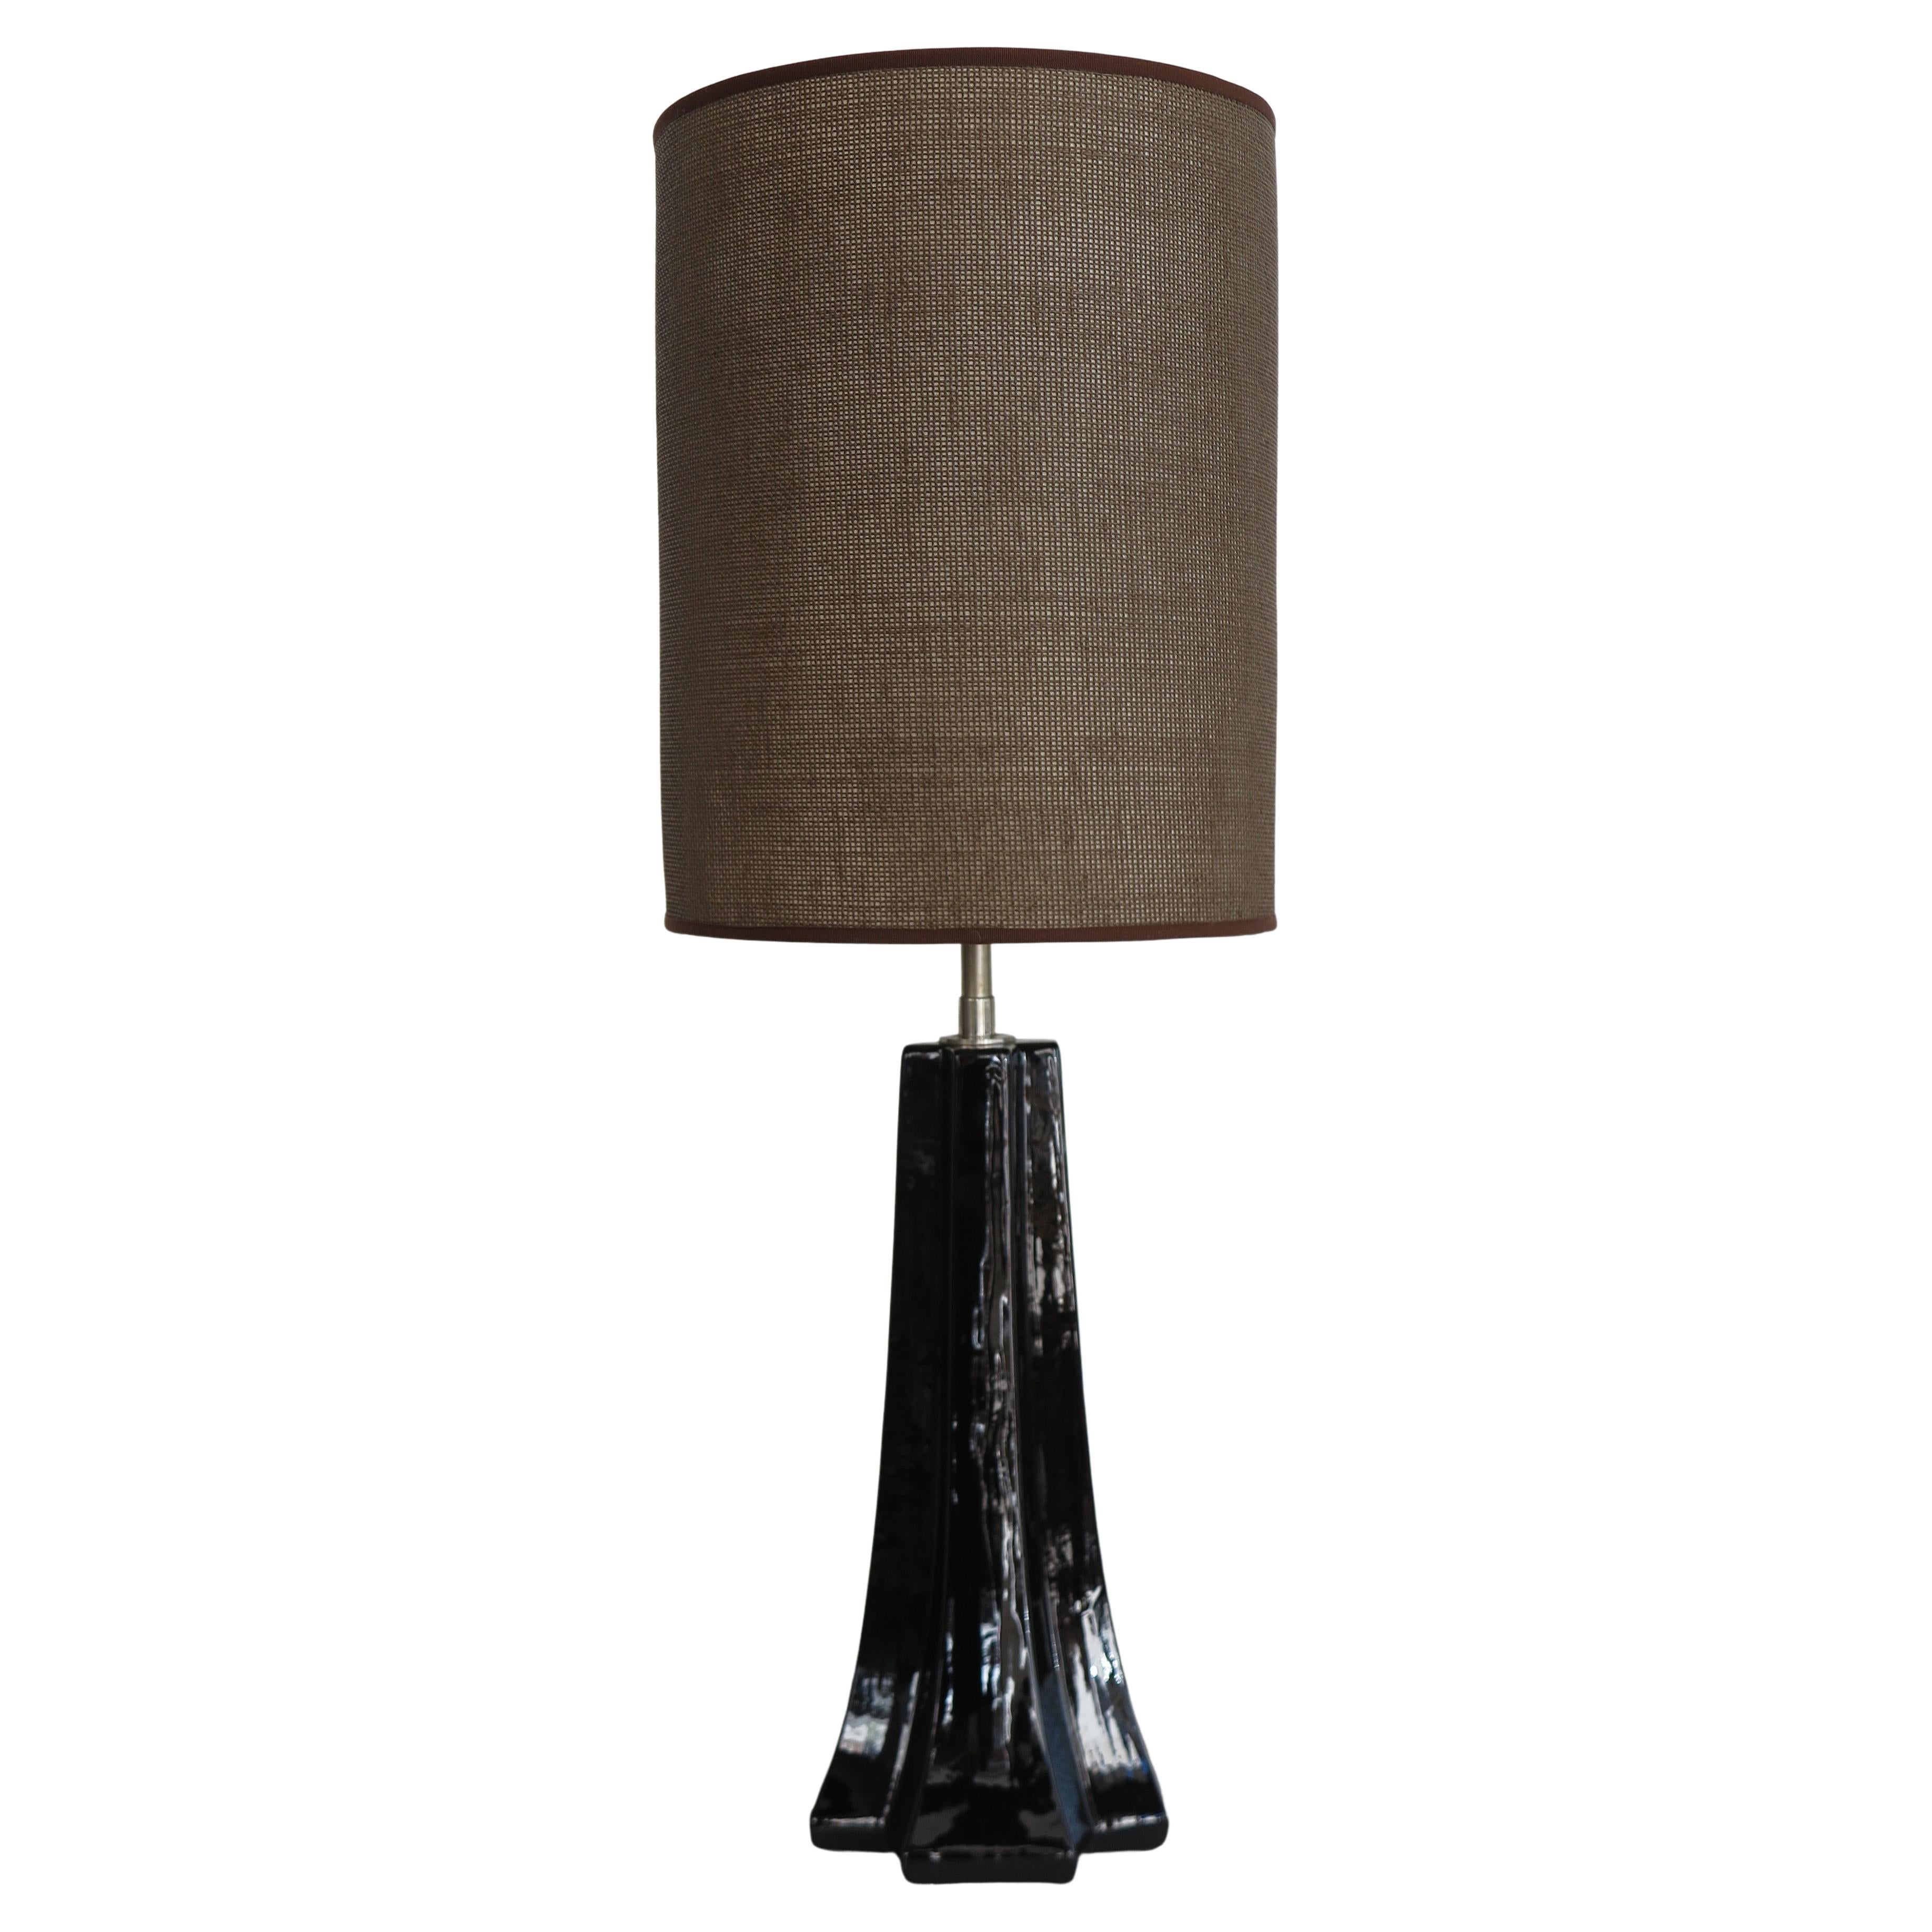 Italian Large Ceramic and Fabric Lampshade Table Lamp, 1960s For Sale